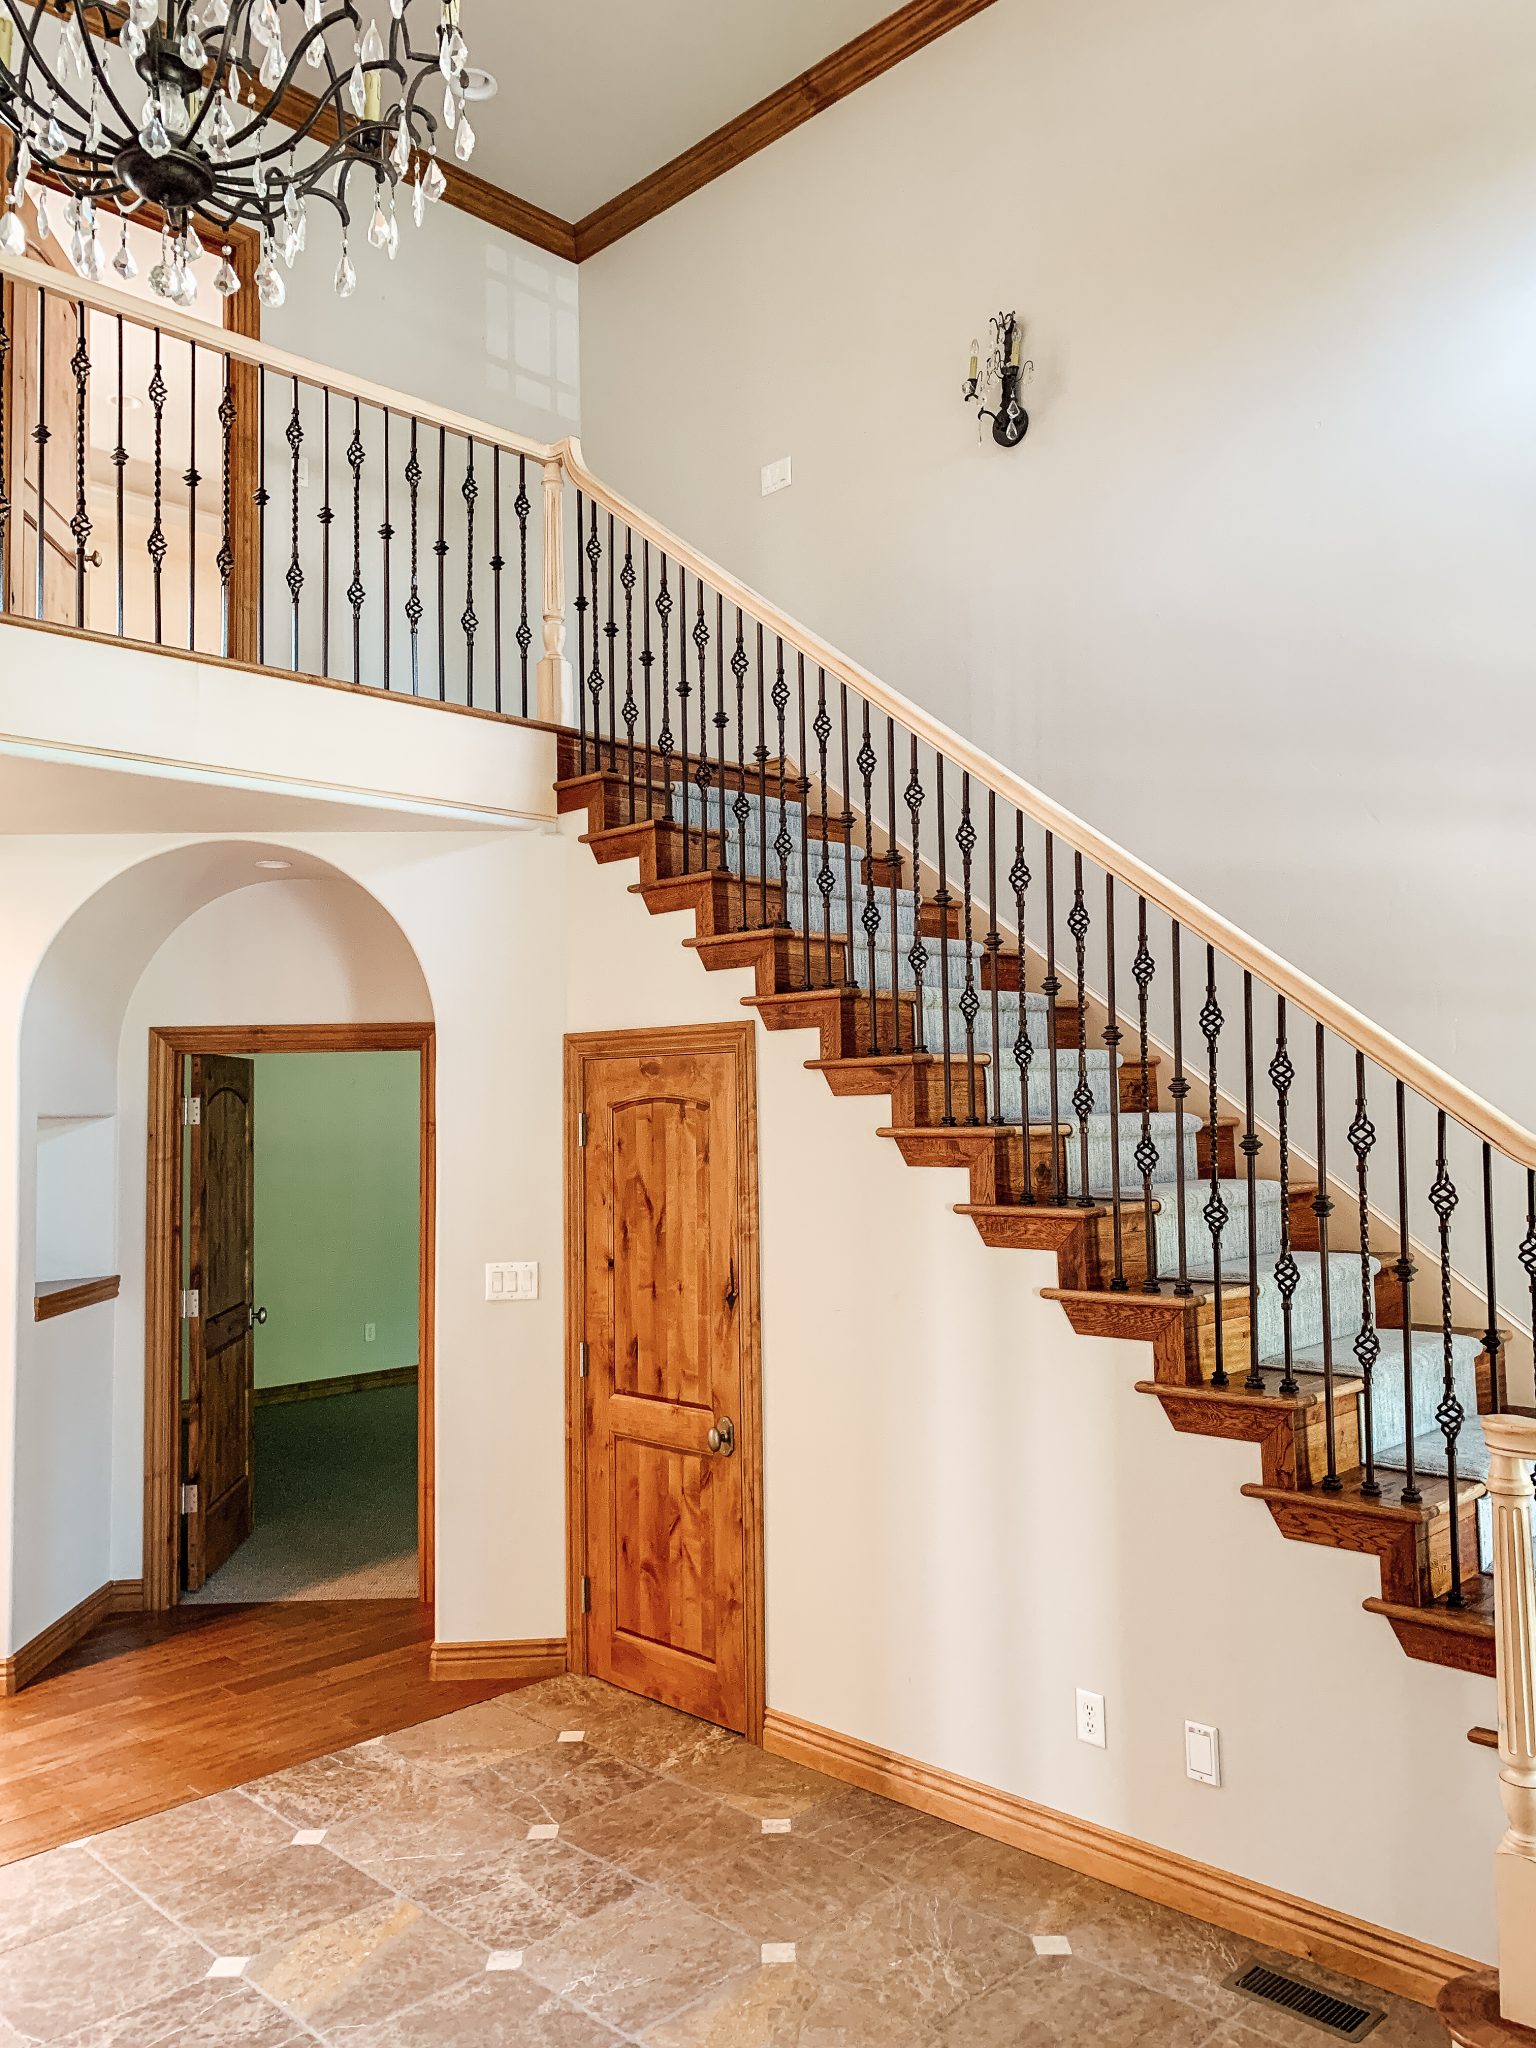 32 Stair Railing Ideas to Elevate Your Home's Style